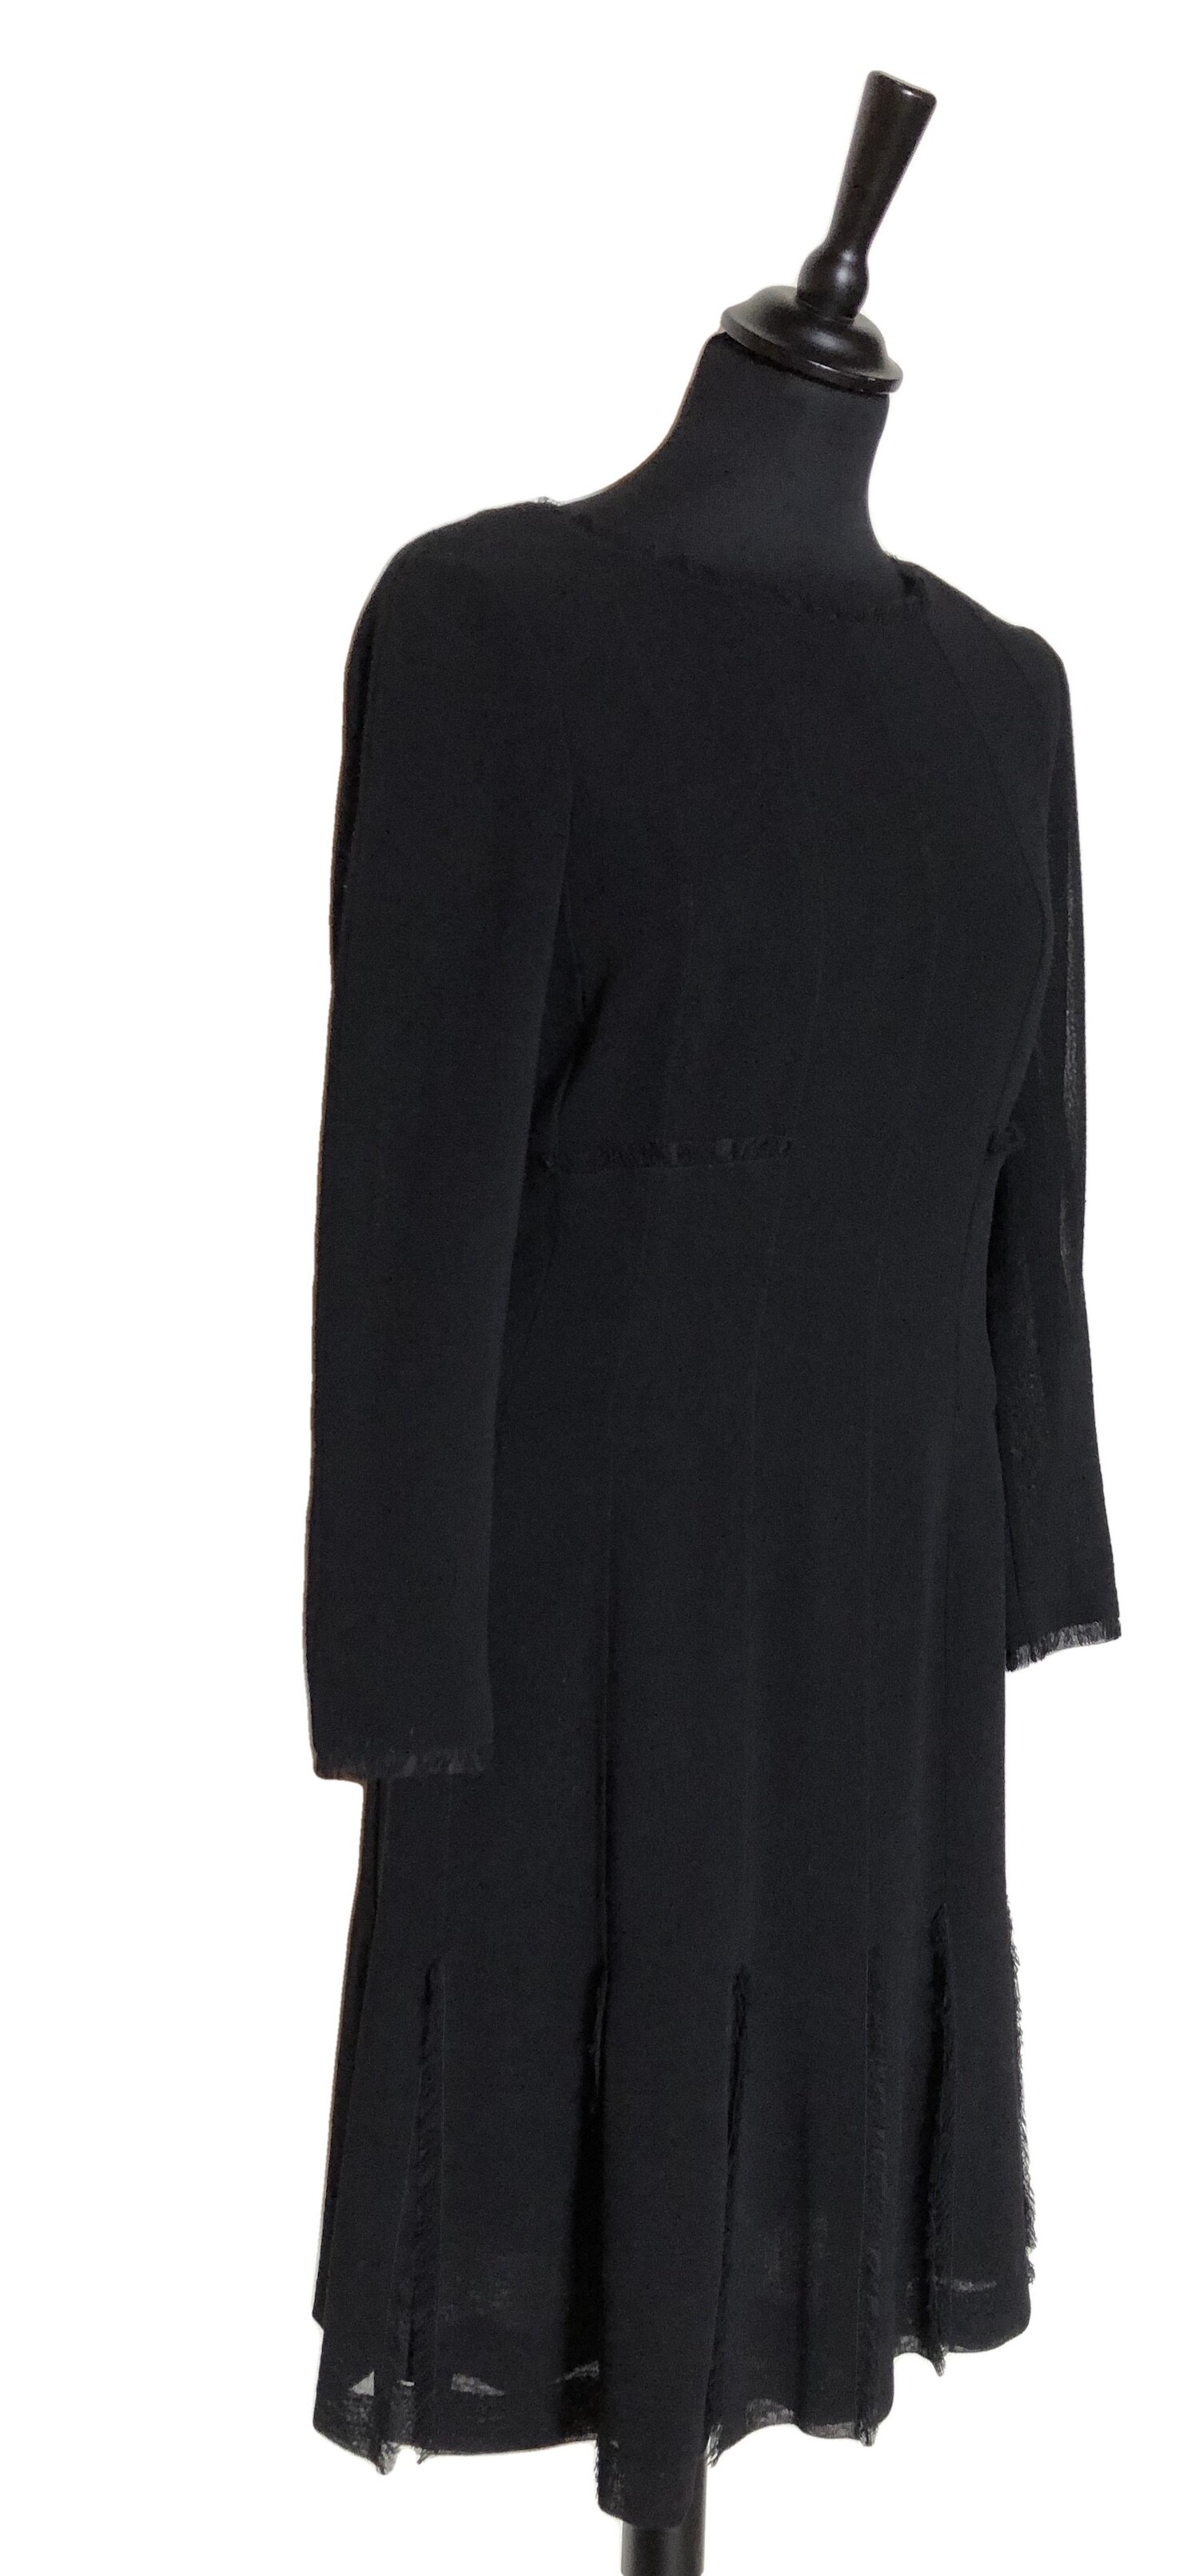 Vintage second hand Chanel dress in black and anthracite gray wool - M Lysis